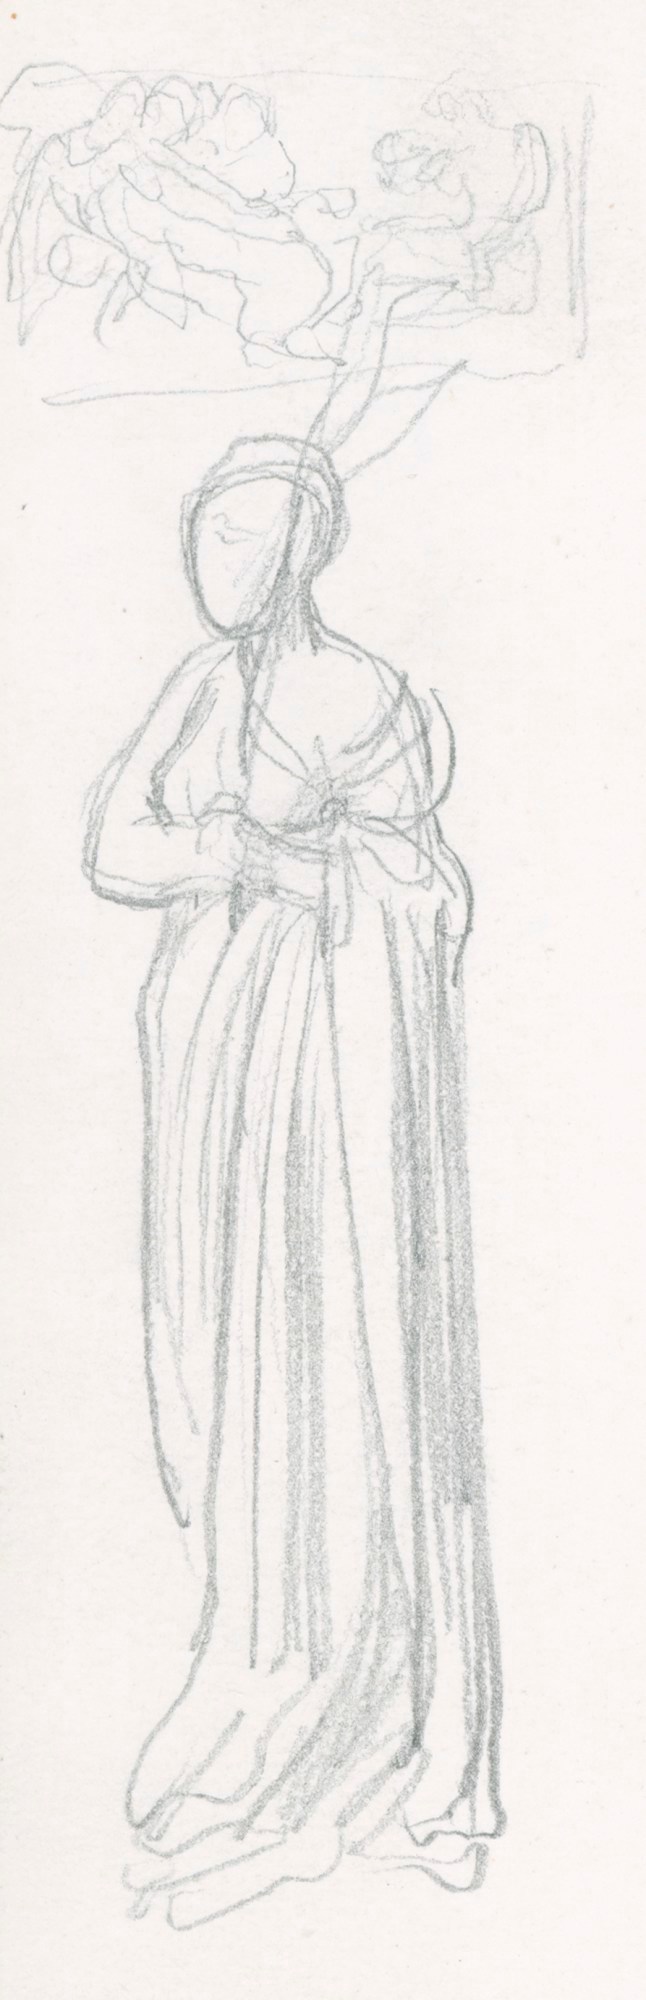 Sketch of a standing female figure holding a palm or laurel branch